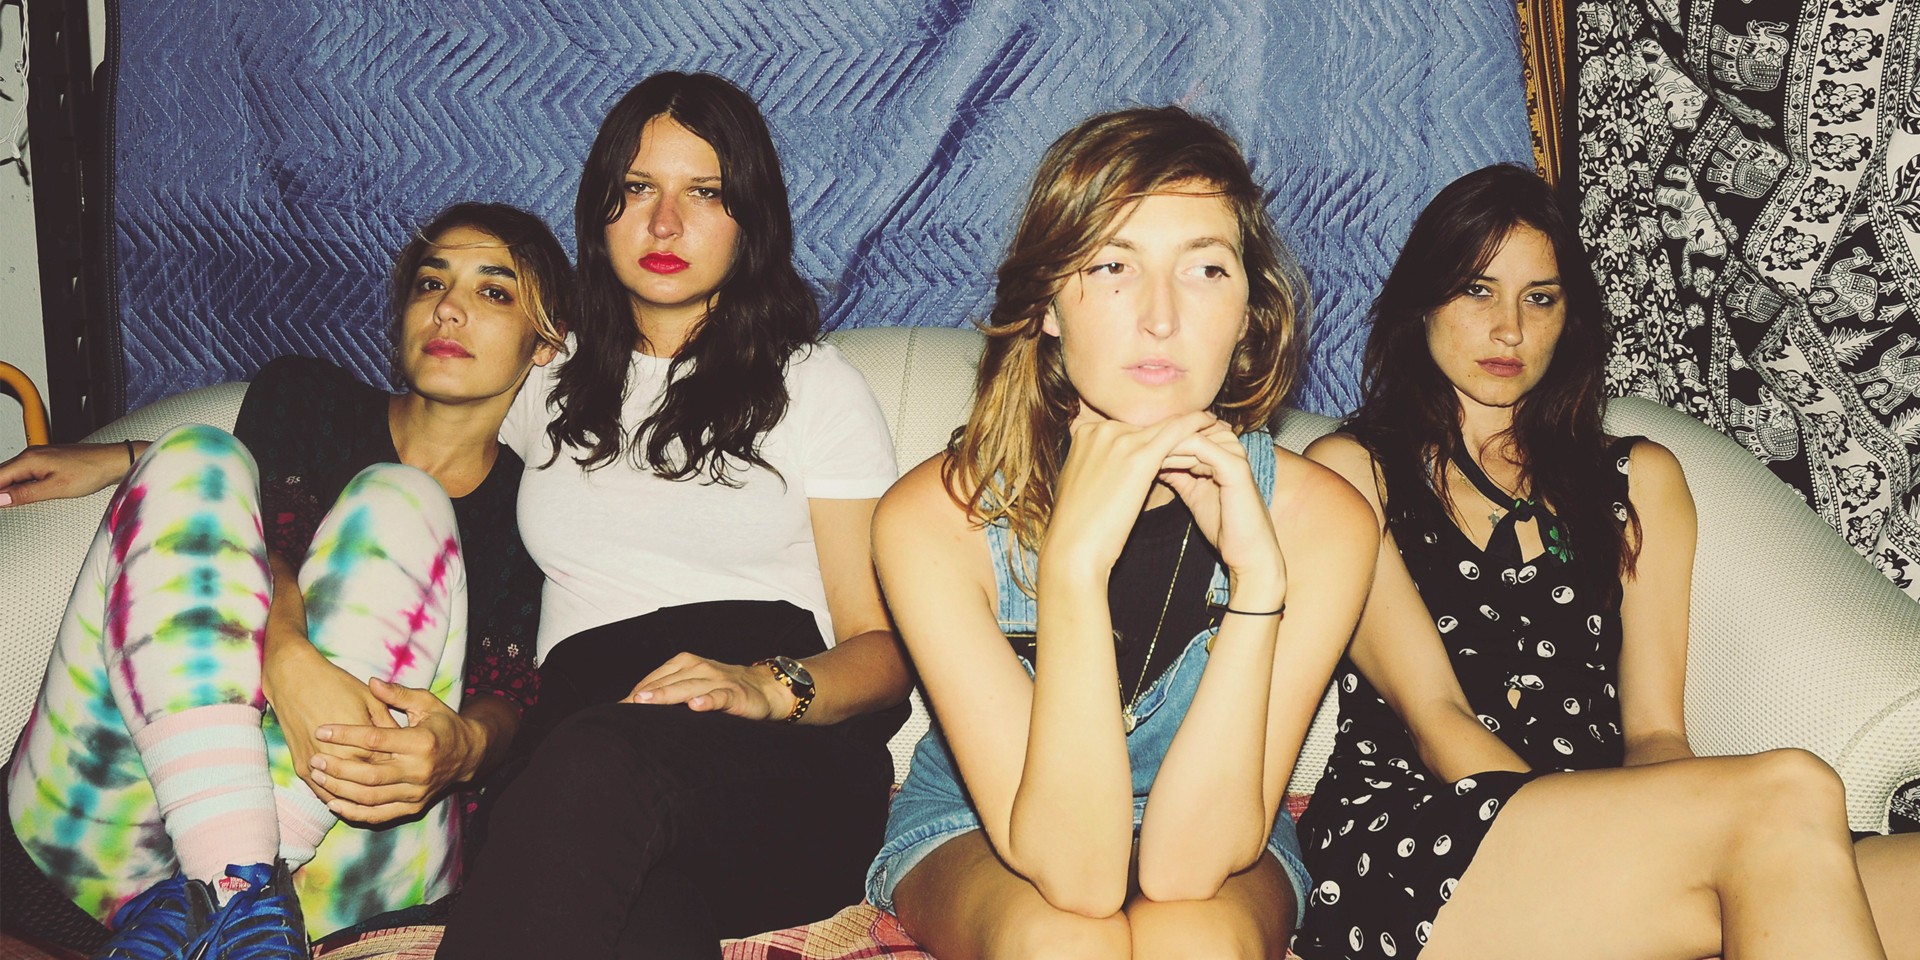 Theresa Wayman on a decade of Warpaint: "I’ve only scratched the surface... I’m just learning to make albums"